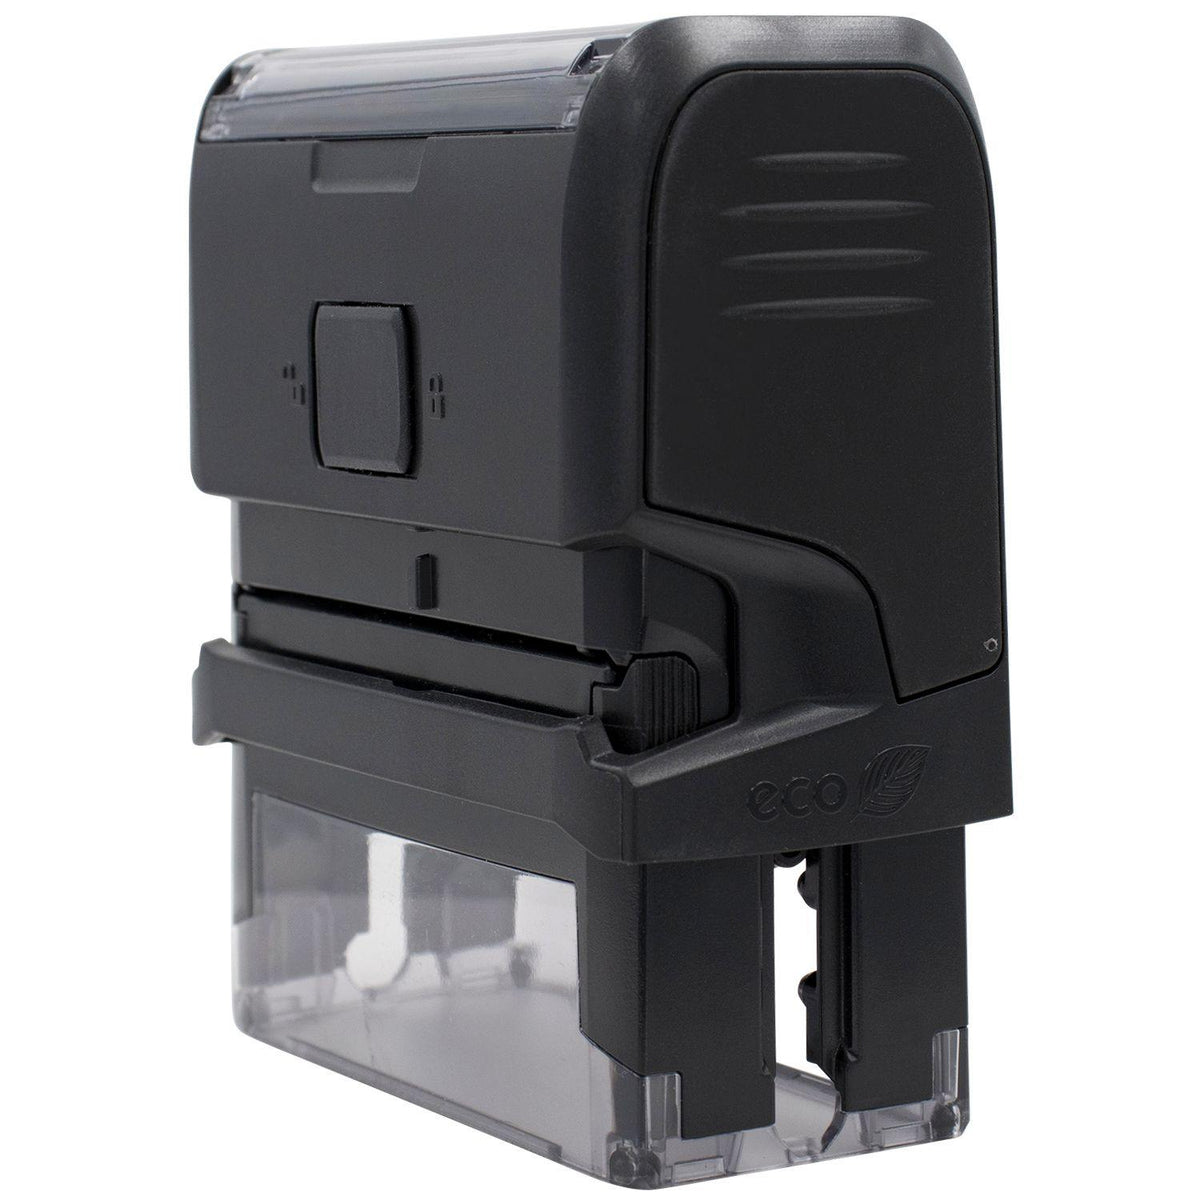 Large Self-Inking Privileged Stamp - Engineer Seal Stamps - Brand_Trodat, Impression Size_Large, Stamp Type_Self-Inking Stamp, Type of Use_Business, Type of Use_Finance, Type of Use_Legal